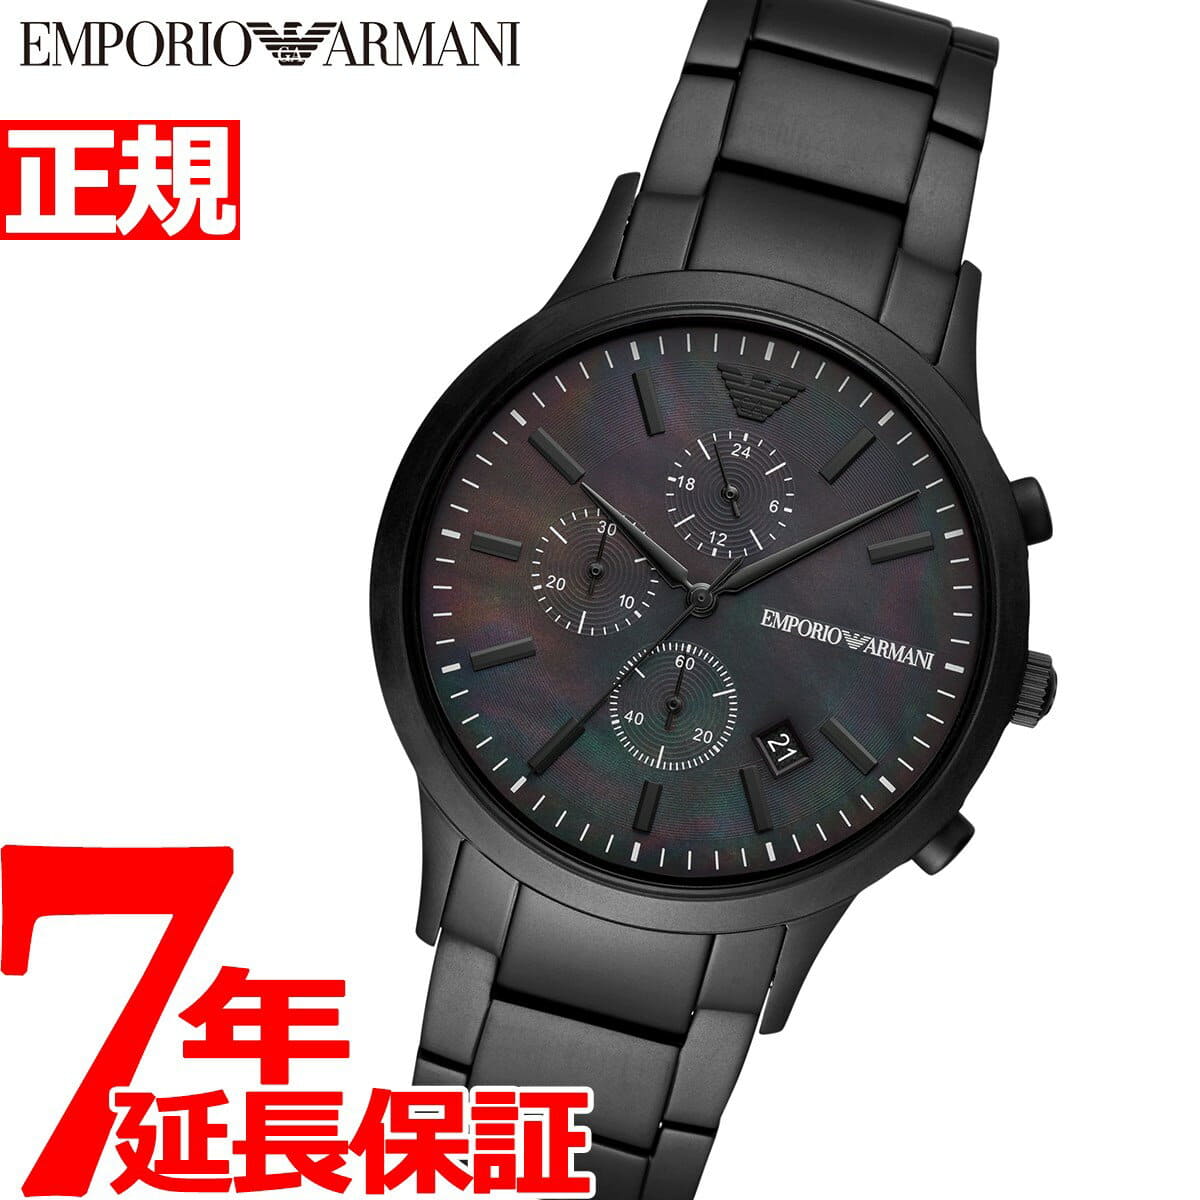 BE is 2,000 Chronograph times up EMPORIO Store - Emporio to New]It 55.5 up AR11275 & to FORWARD ARMANI Armani mens